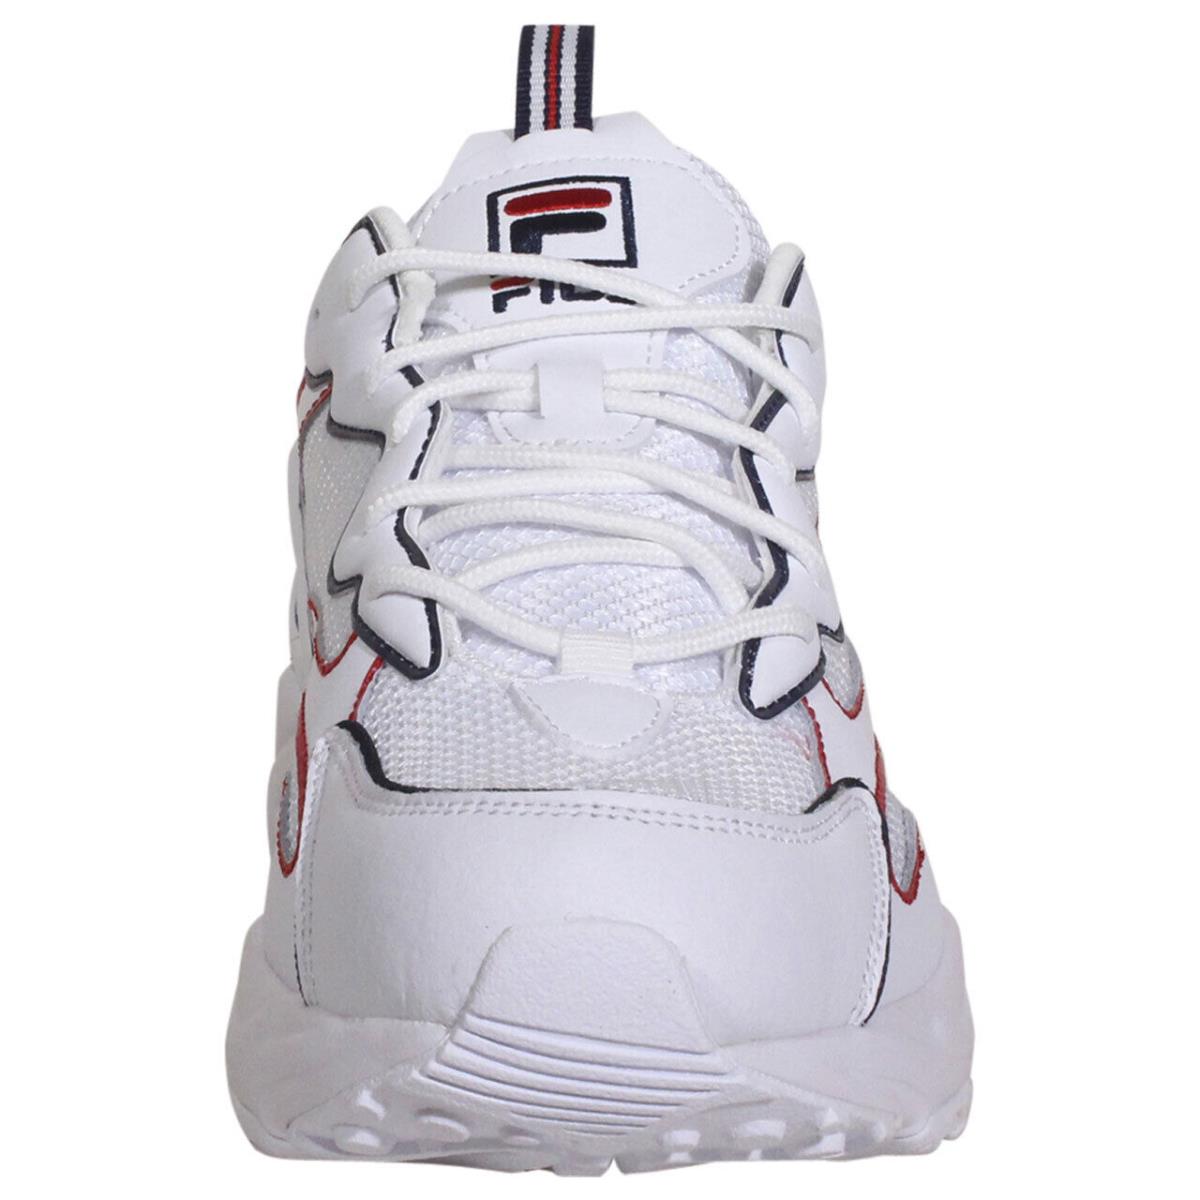 Fila Ray-tracer-contrast-piping Sneakers White/navy/red Men`s Shoes Sz: 7.5